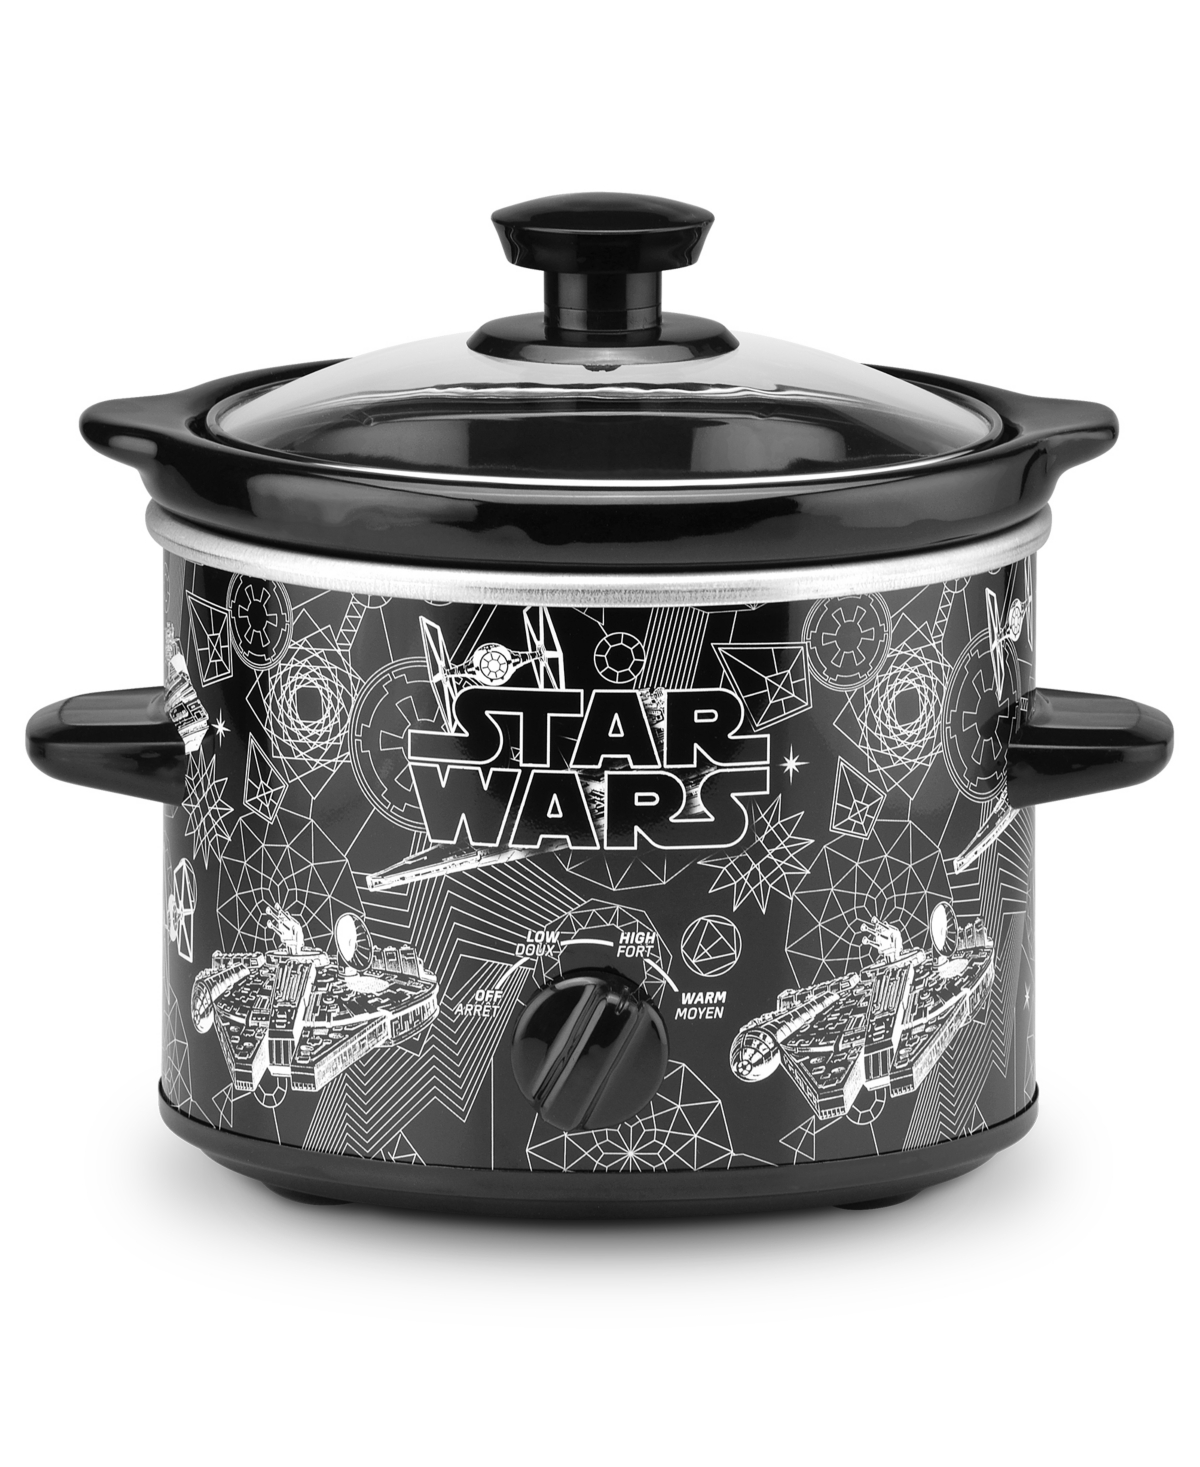 Star Wars 2-quart Slow Cooker In Silver